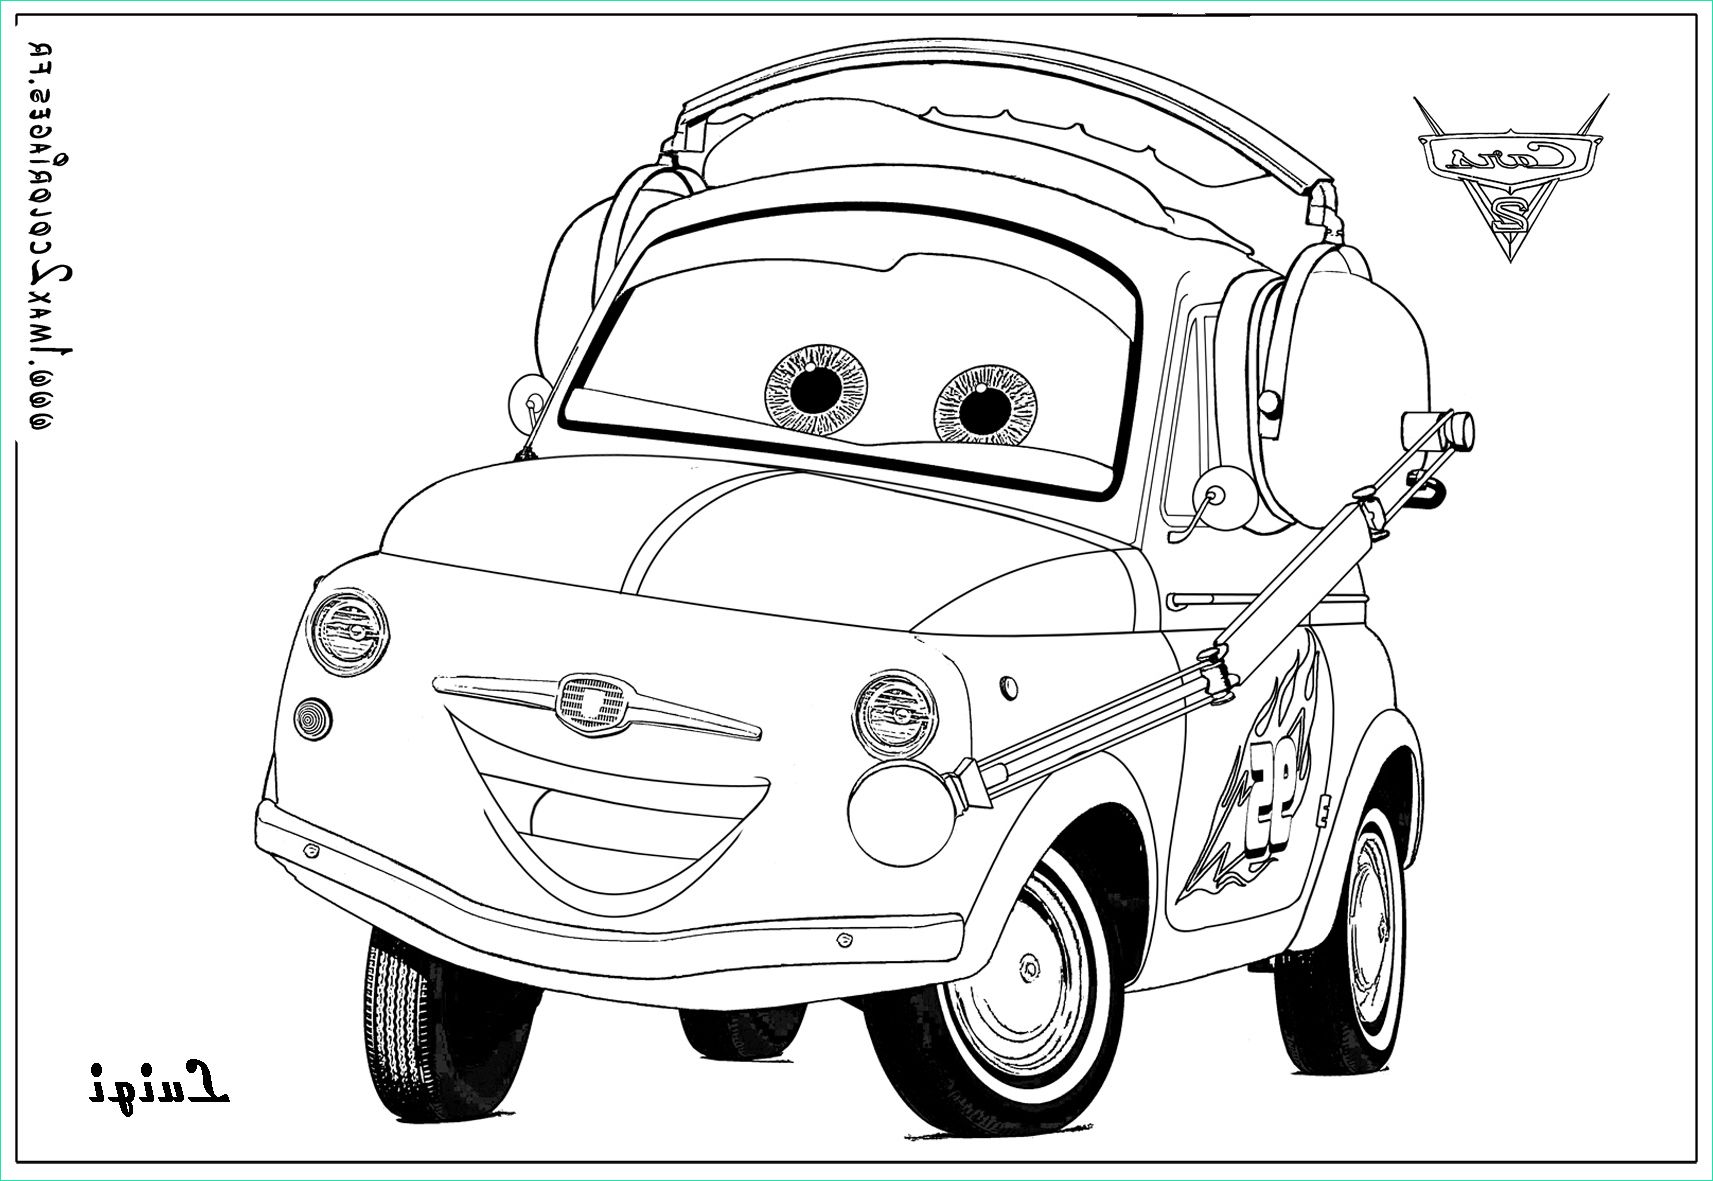 Dessin Car Beau Image Coloring Page Cars 2